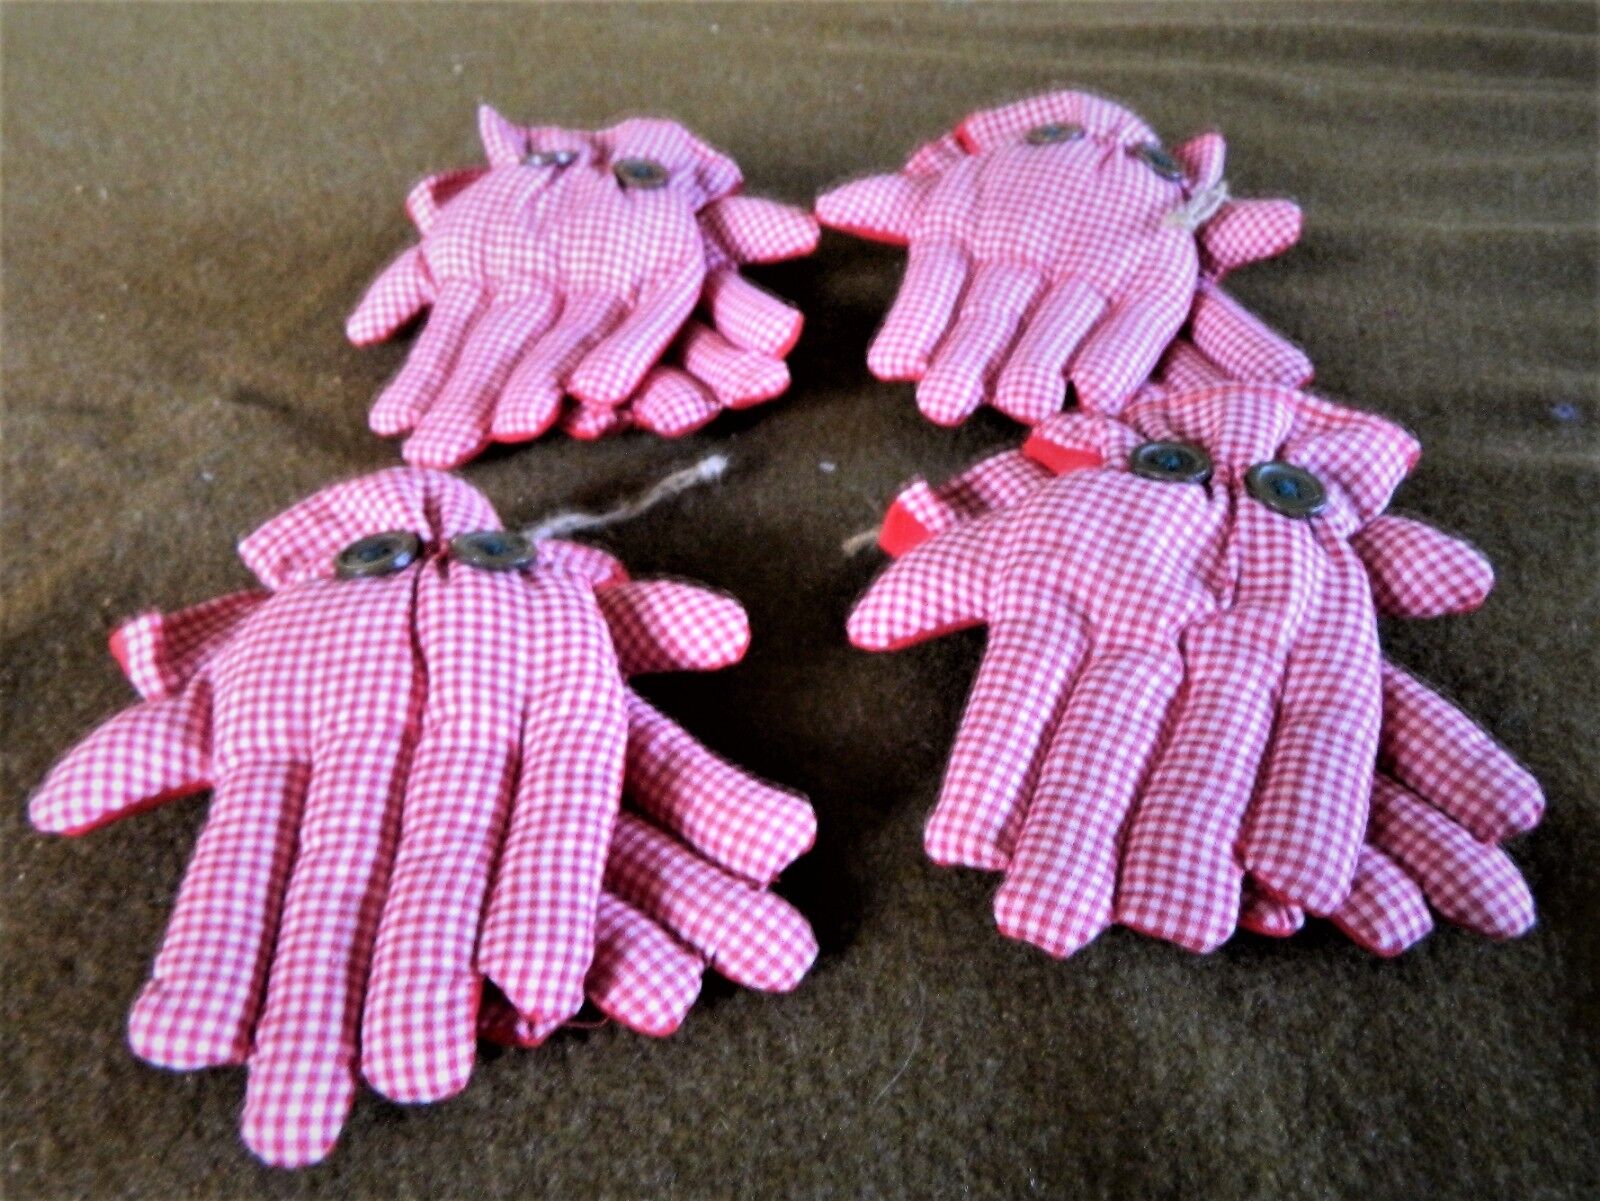 Decorative Glove Ornaments - Fiber Filled Fabric with Buttons Lot of 4 Pieces Unbranded N/A